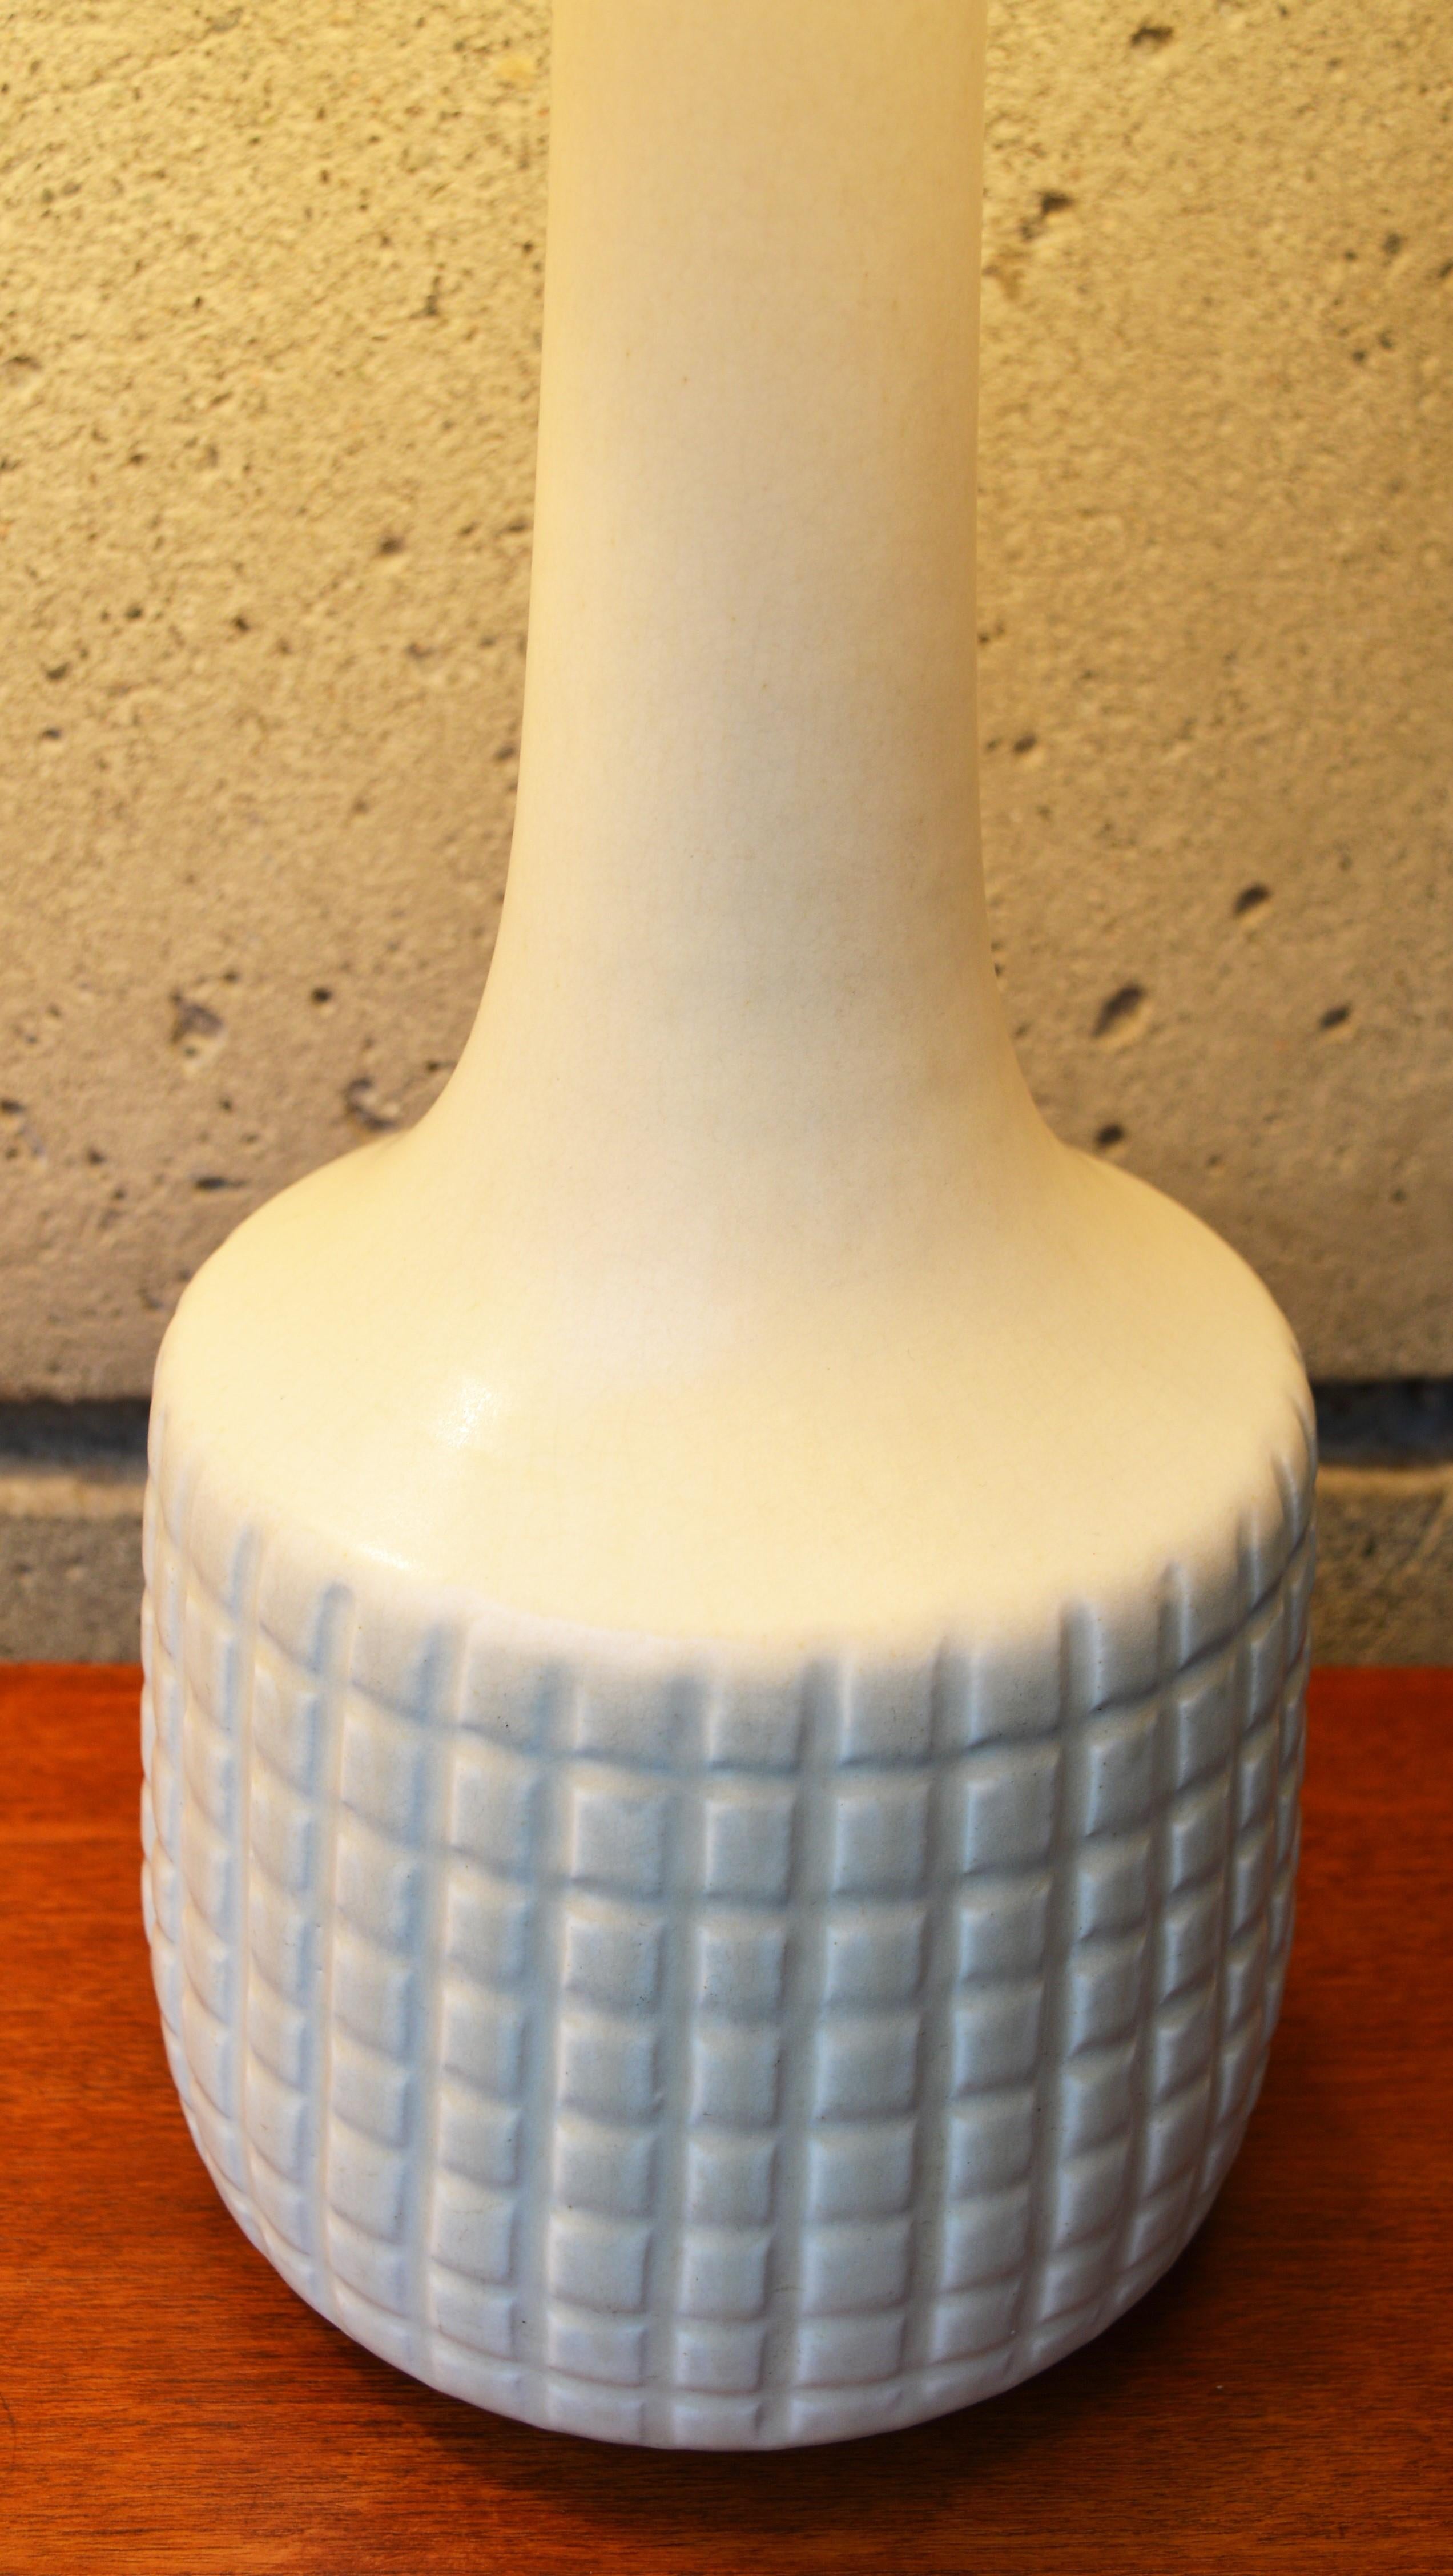 Canadian Incised Cream Ceramic Lotte & Gunnar Bostlund Lamps with Fiberglass Shades, Pair For Sale